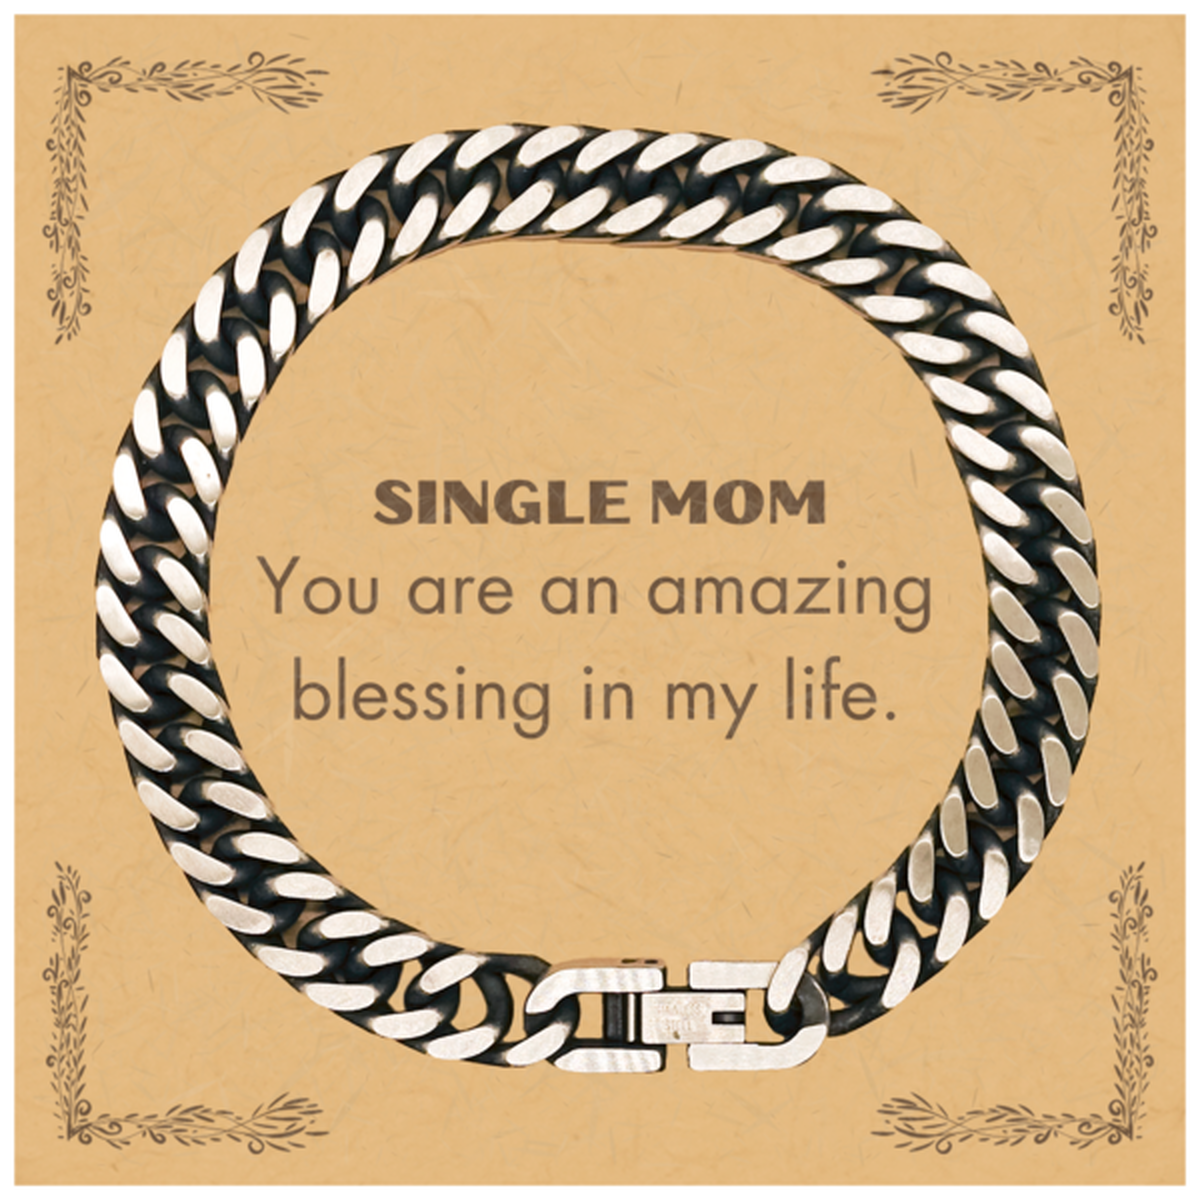 Single Mom Cuban Link Chain Bracelet, You are an amazing blessing in my life, Thank You Gifts For Single Mom, Inspirational Birthday Christmas Unique Gifts For Single Mom